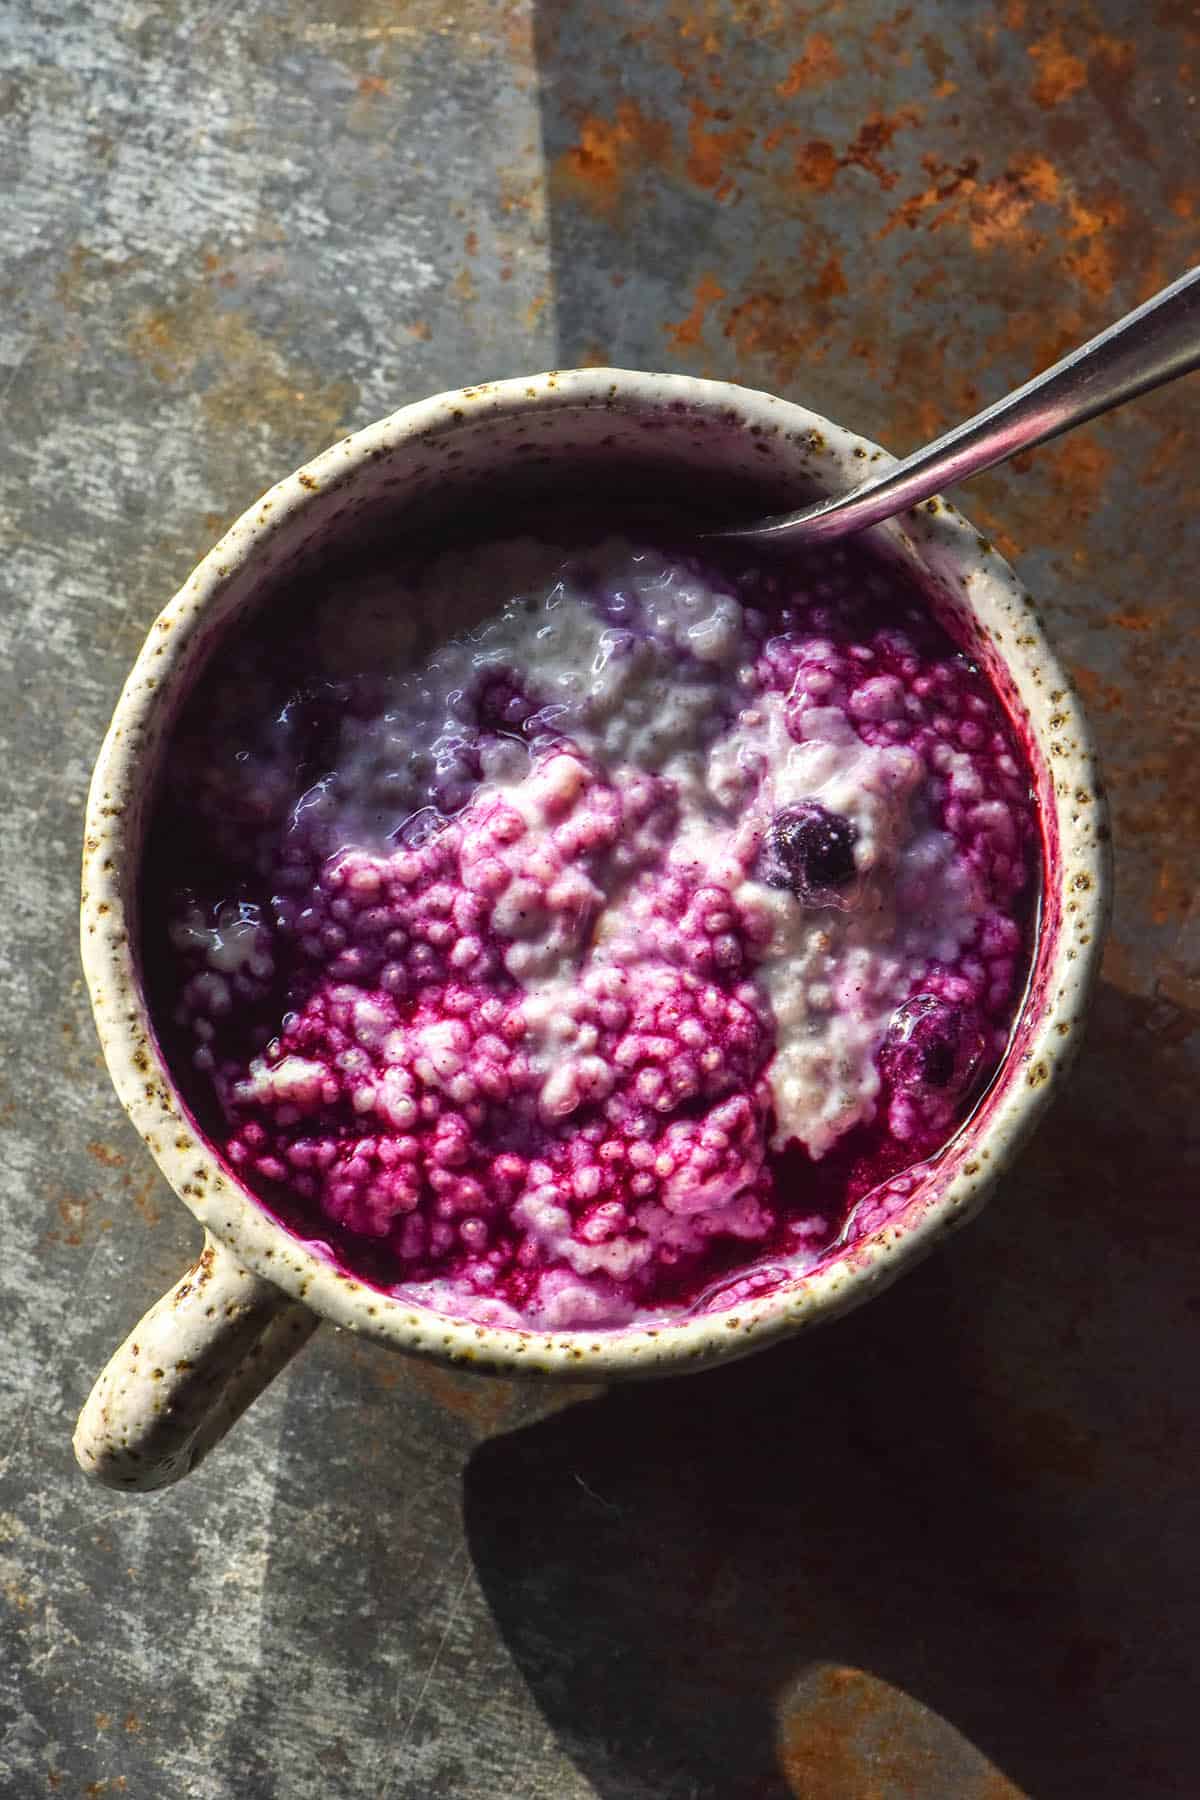 An aerial image of a white speckled ceramic mug filled with a vibrant purple blueberry chia pudding. The mug sits atop a dark grey steel backdrop